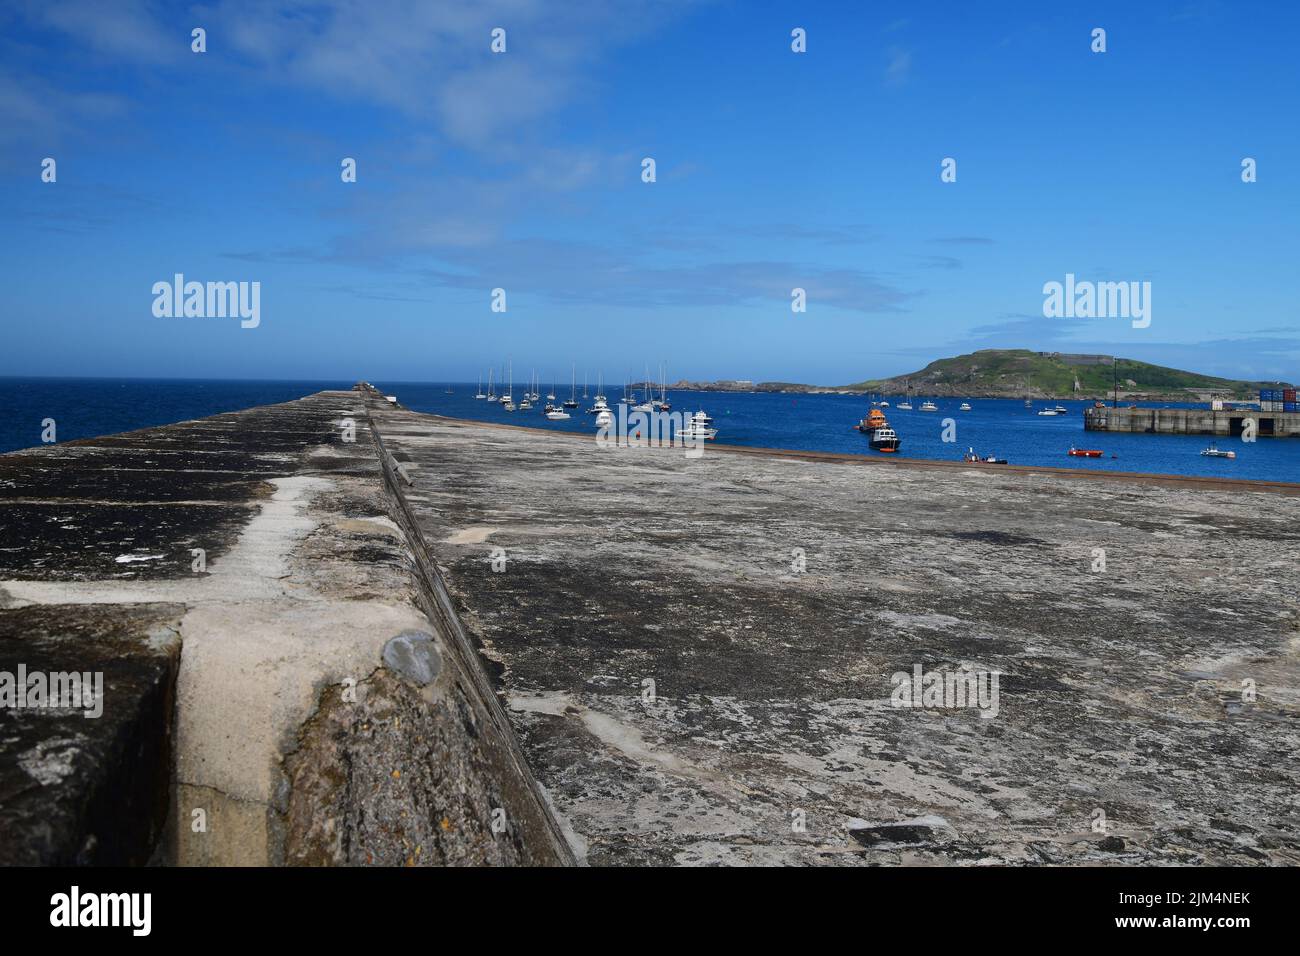 The 910m long breakwater was built by the Admiralty to protect Royal Navy ships in the harbour, it was completed in 1864, Alderney, Channel Islands, G Stock Photo